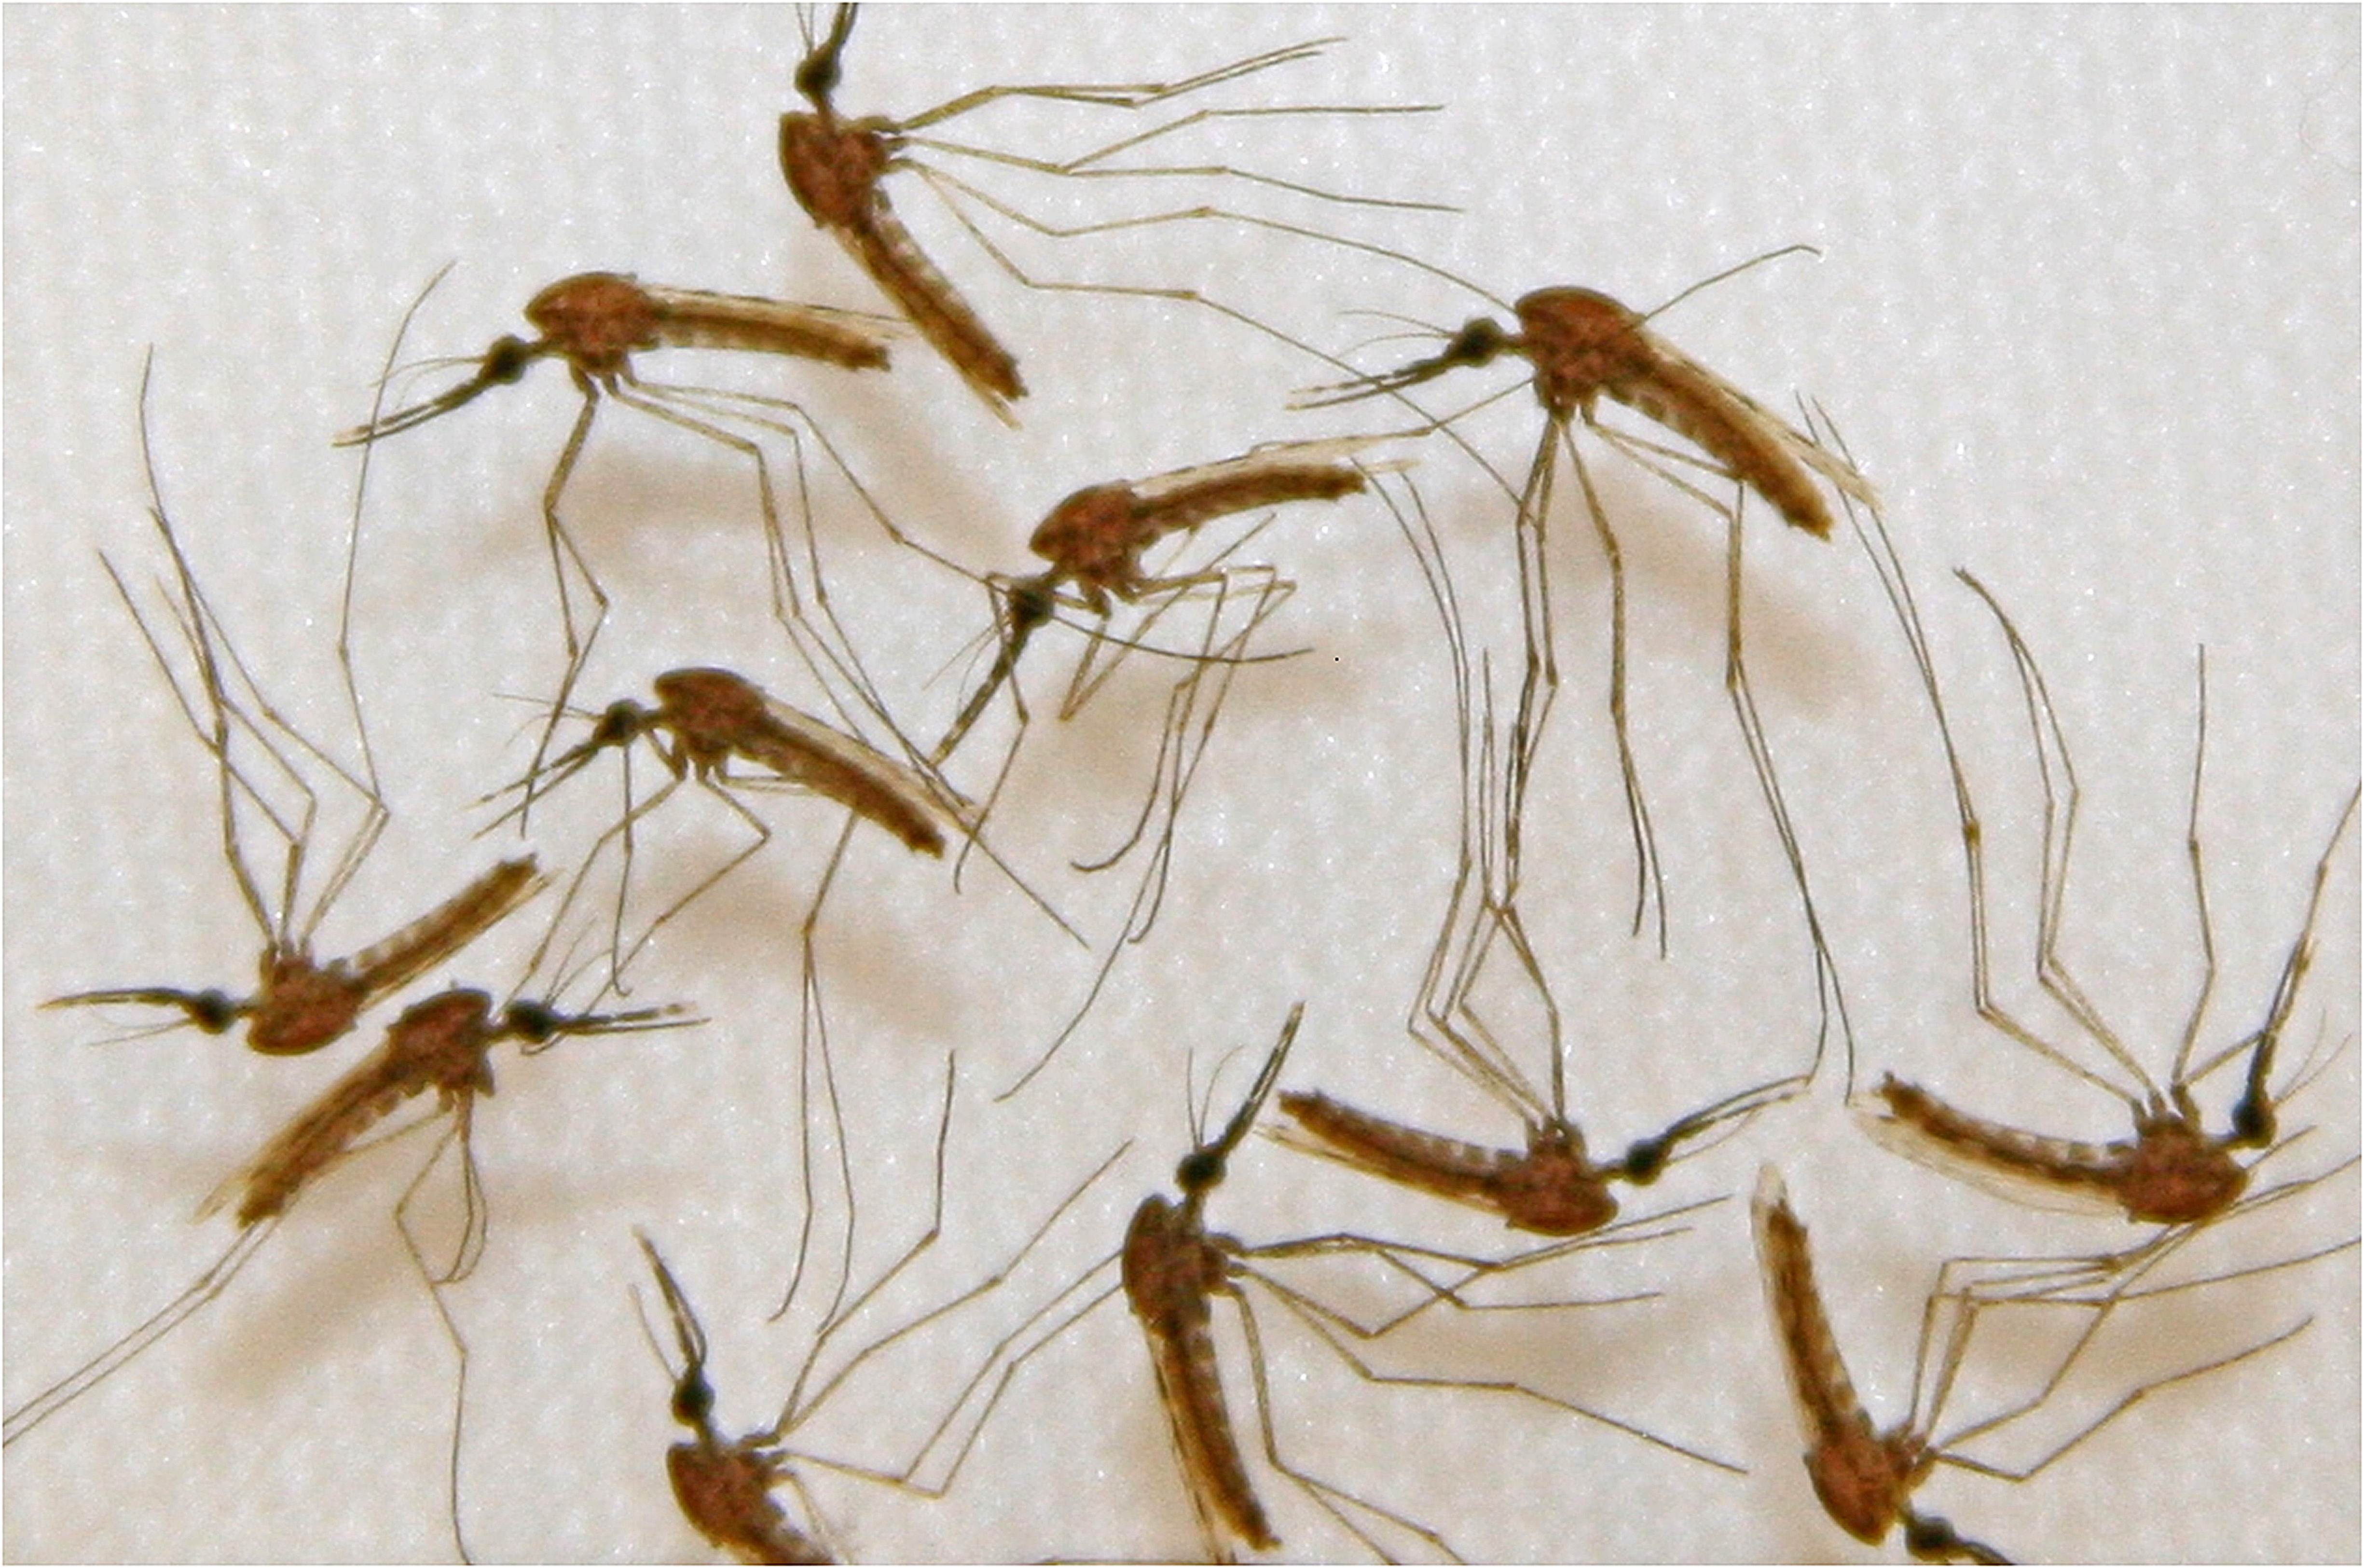 Malaria infected mosquitoes. Photo: AFP